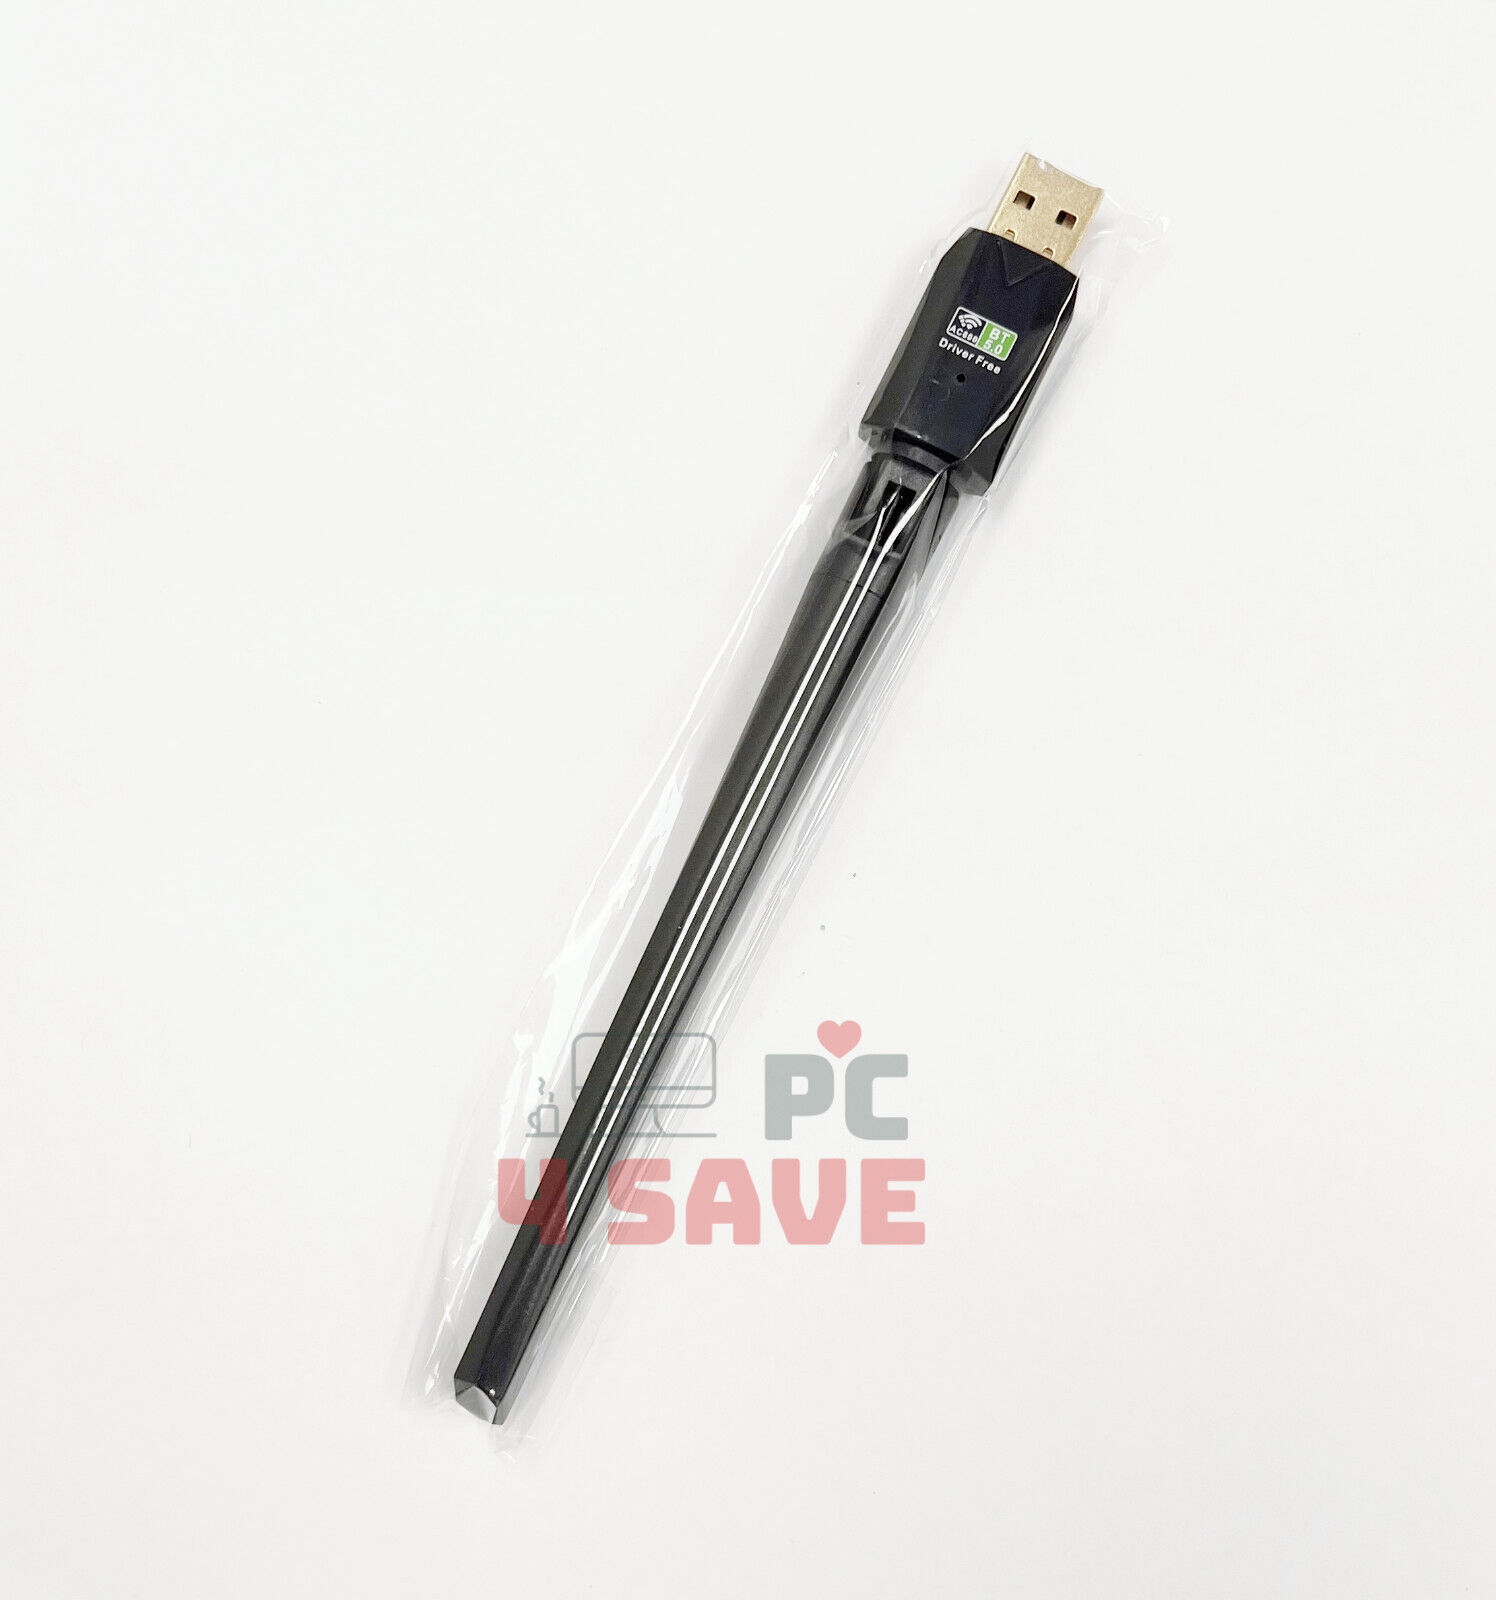 USB Bluetooth 5.0 WiFi Adapter 600Mbps Dual Band 2.4/5Ghz Wireless with Antenna